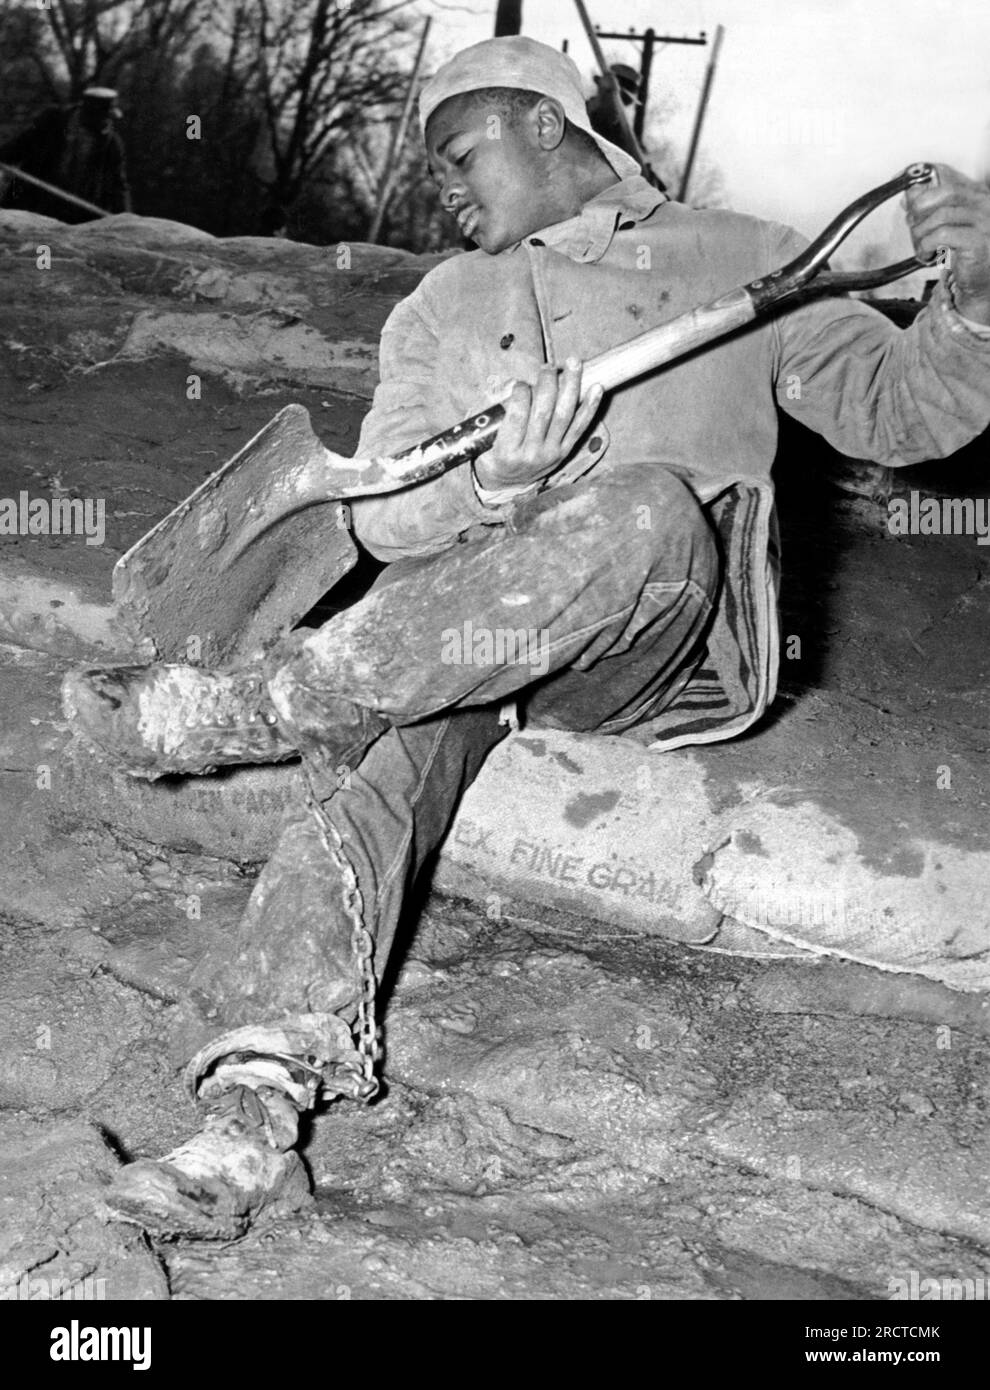 Memphis, Tennessee:   February 2, 1937 A chain gang prisoner from the Shelby County Penal Farm pauses to clean his shoes while sandbagging a Mississippi River levee. Stock Photo